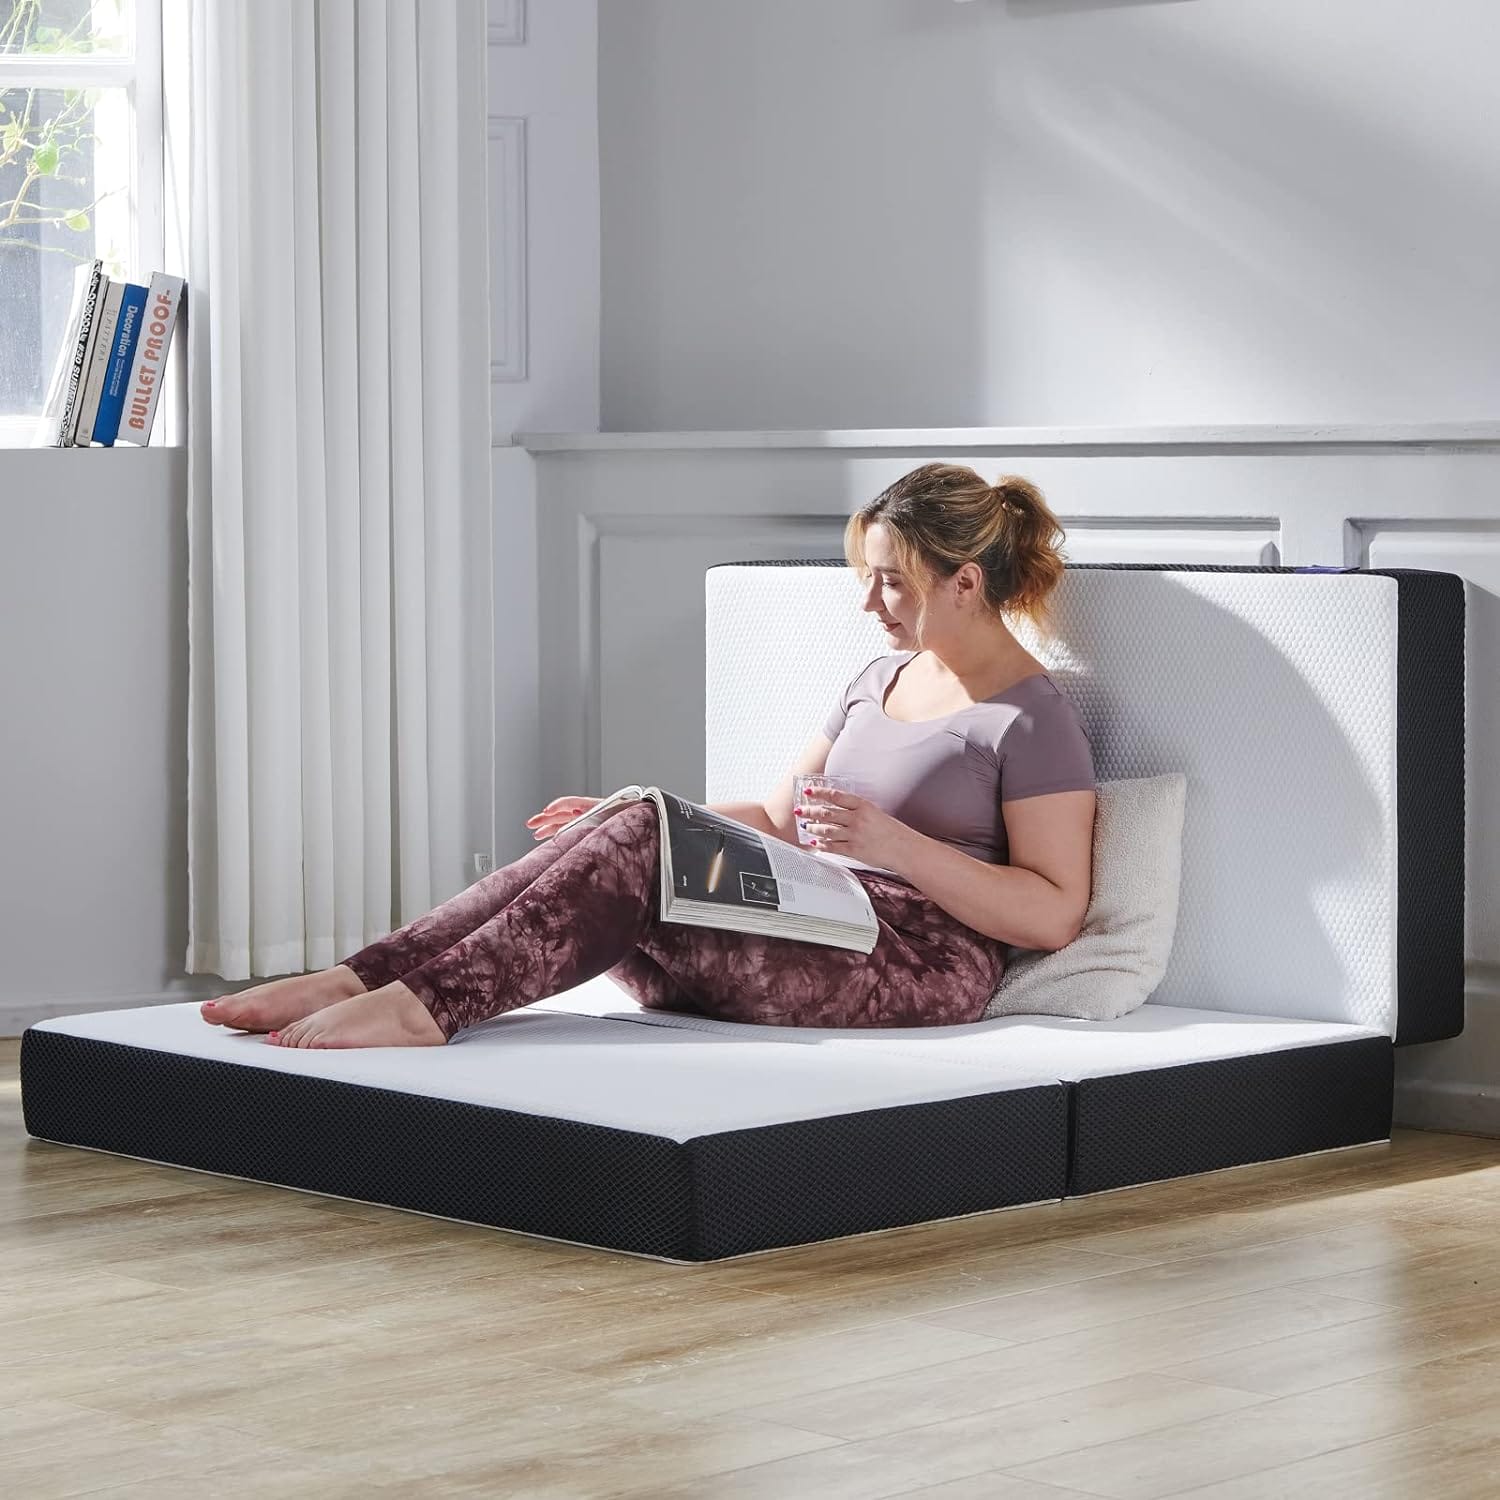 S SECRETLAND Mattress Review: Portable Comfort for Any Space